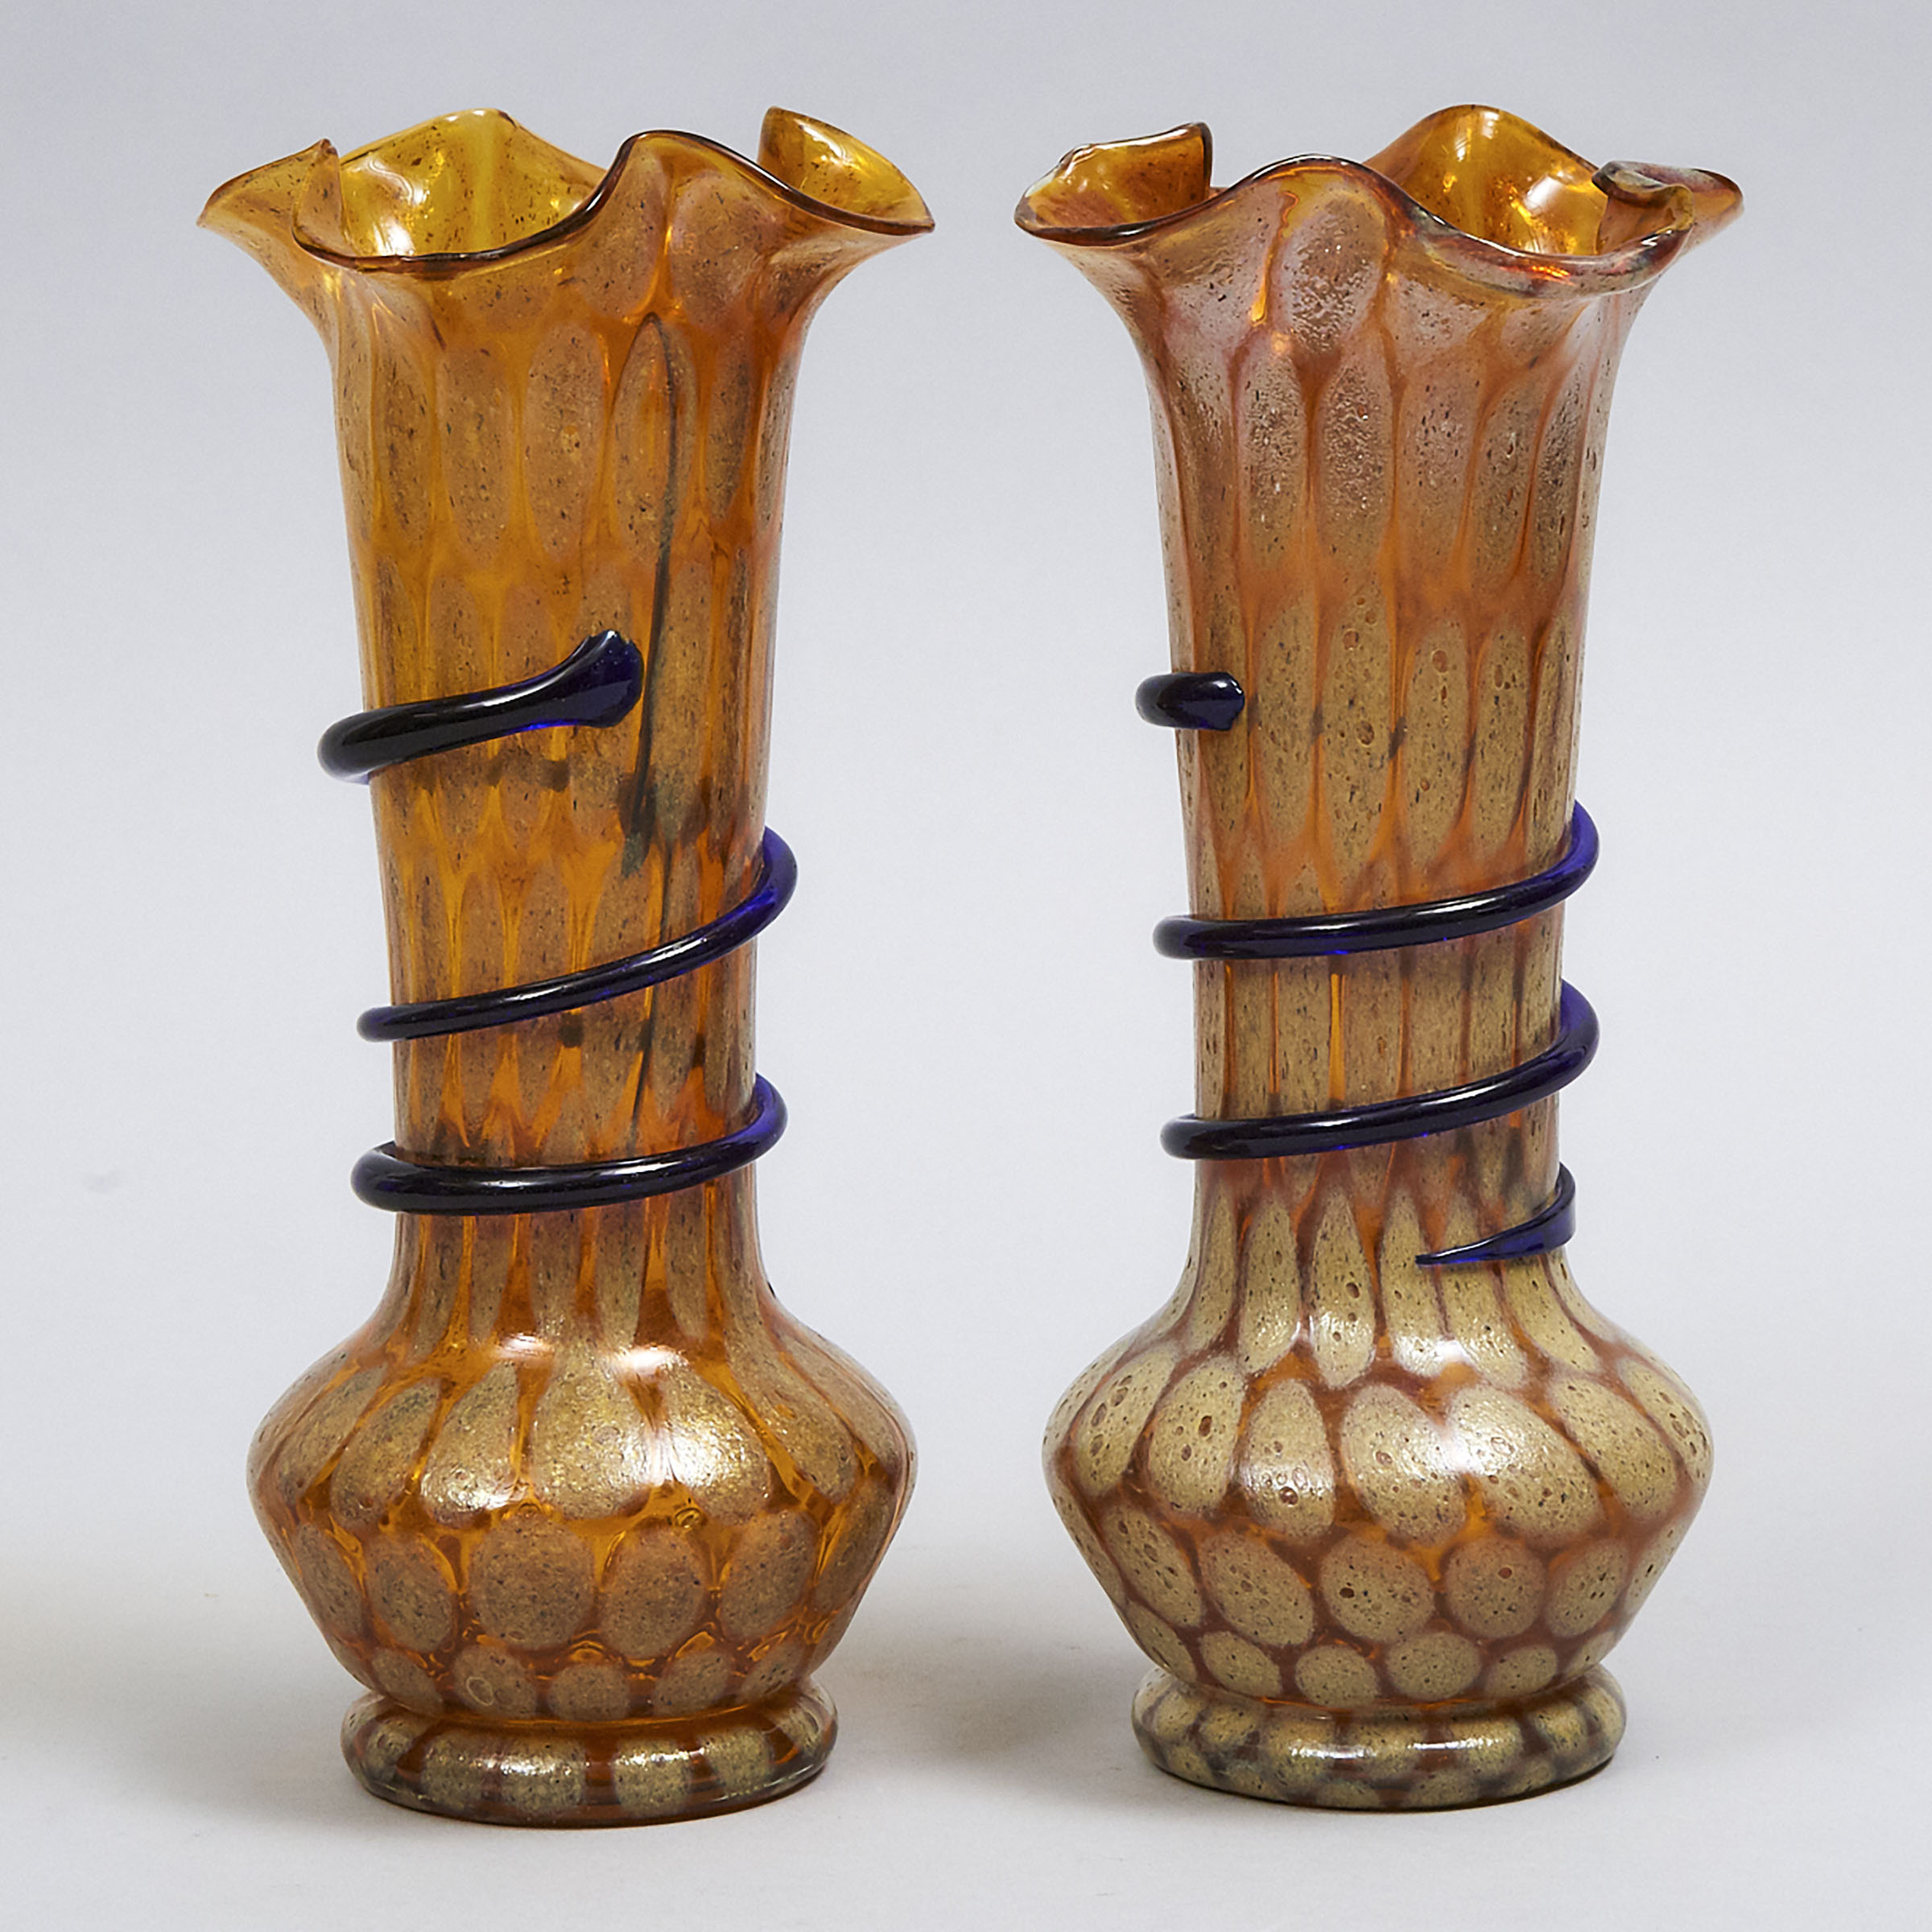 Pair of Bohemian Iridescent Coloured Glass Vases, early 20th century